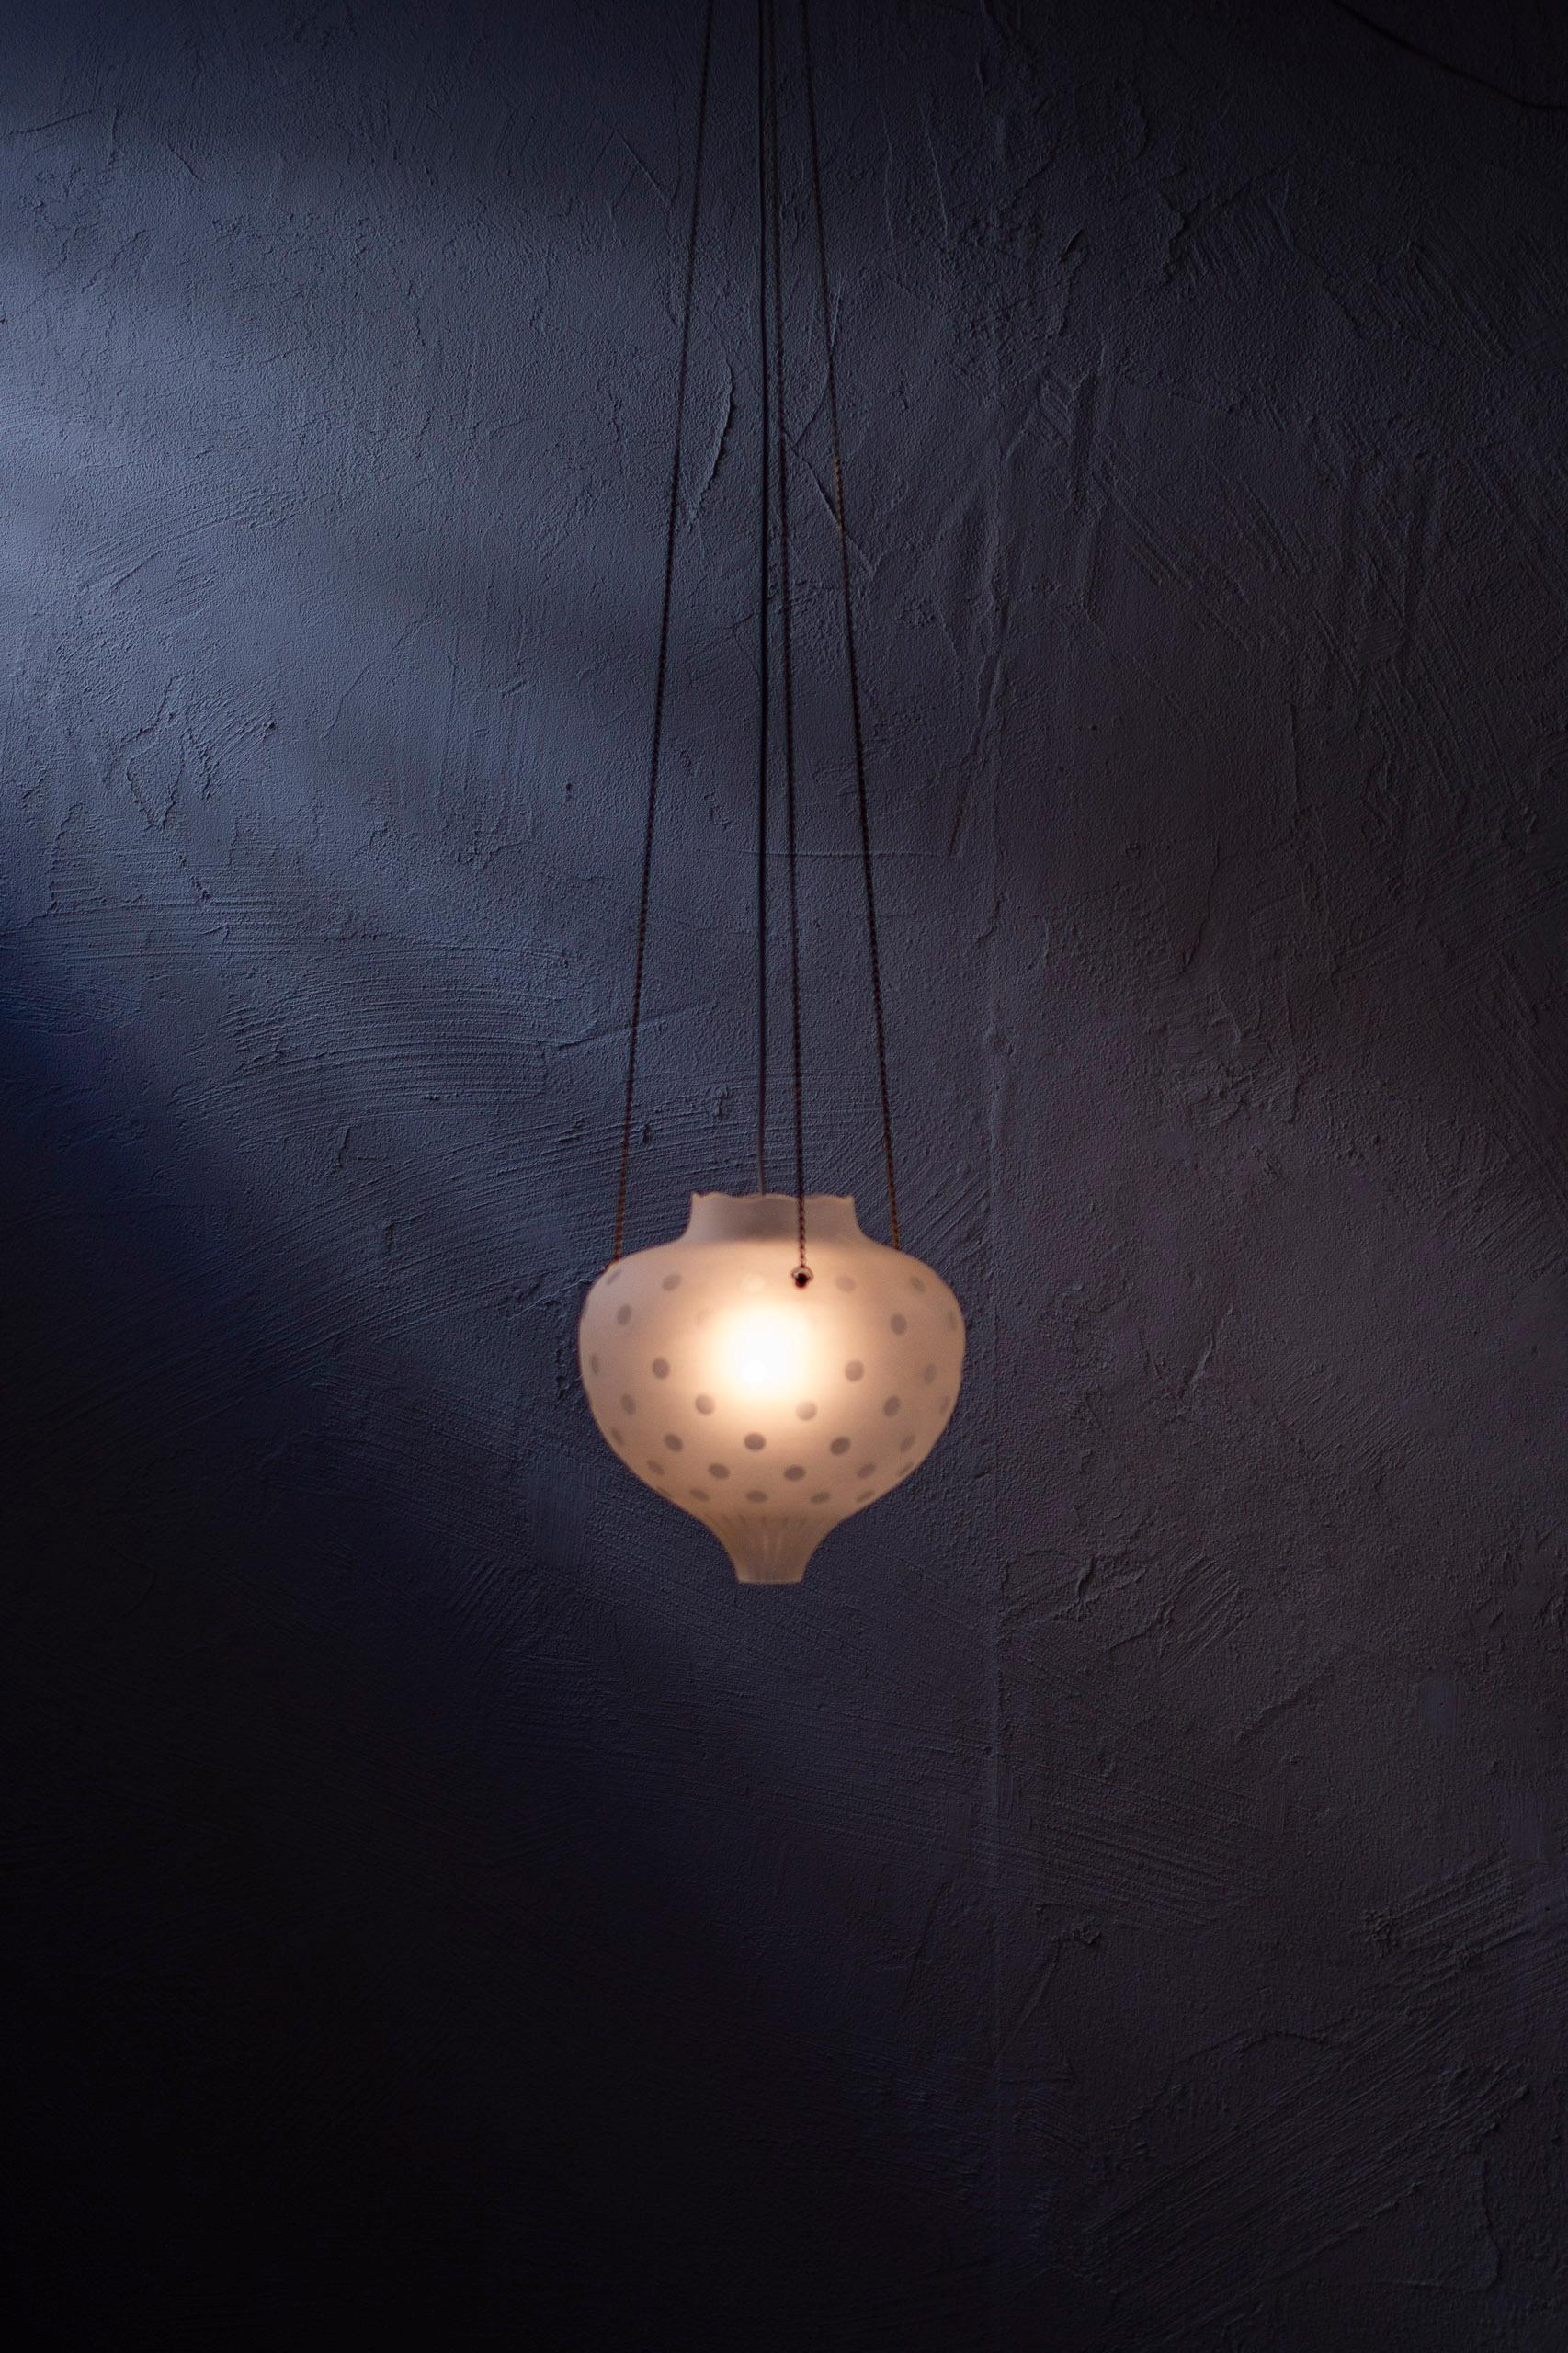 Mid-20th Century Swedish Modern Etched Glass Pendant Lamp by Flygsfors, Sweden, 1940s